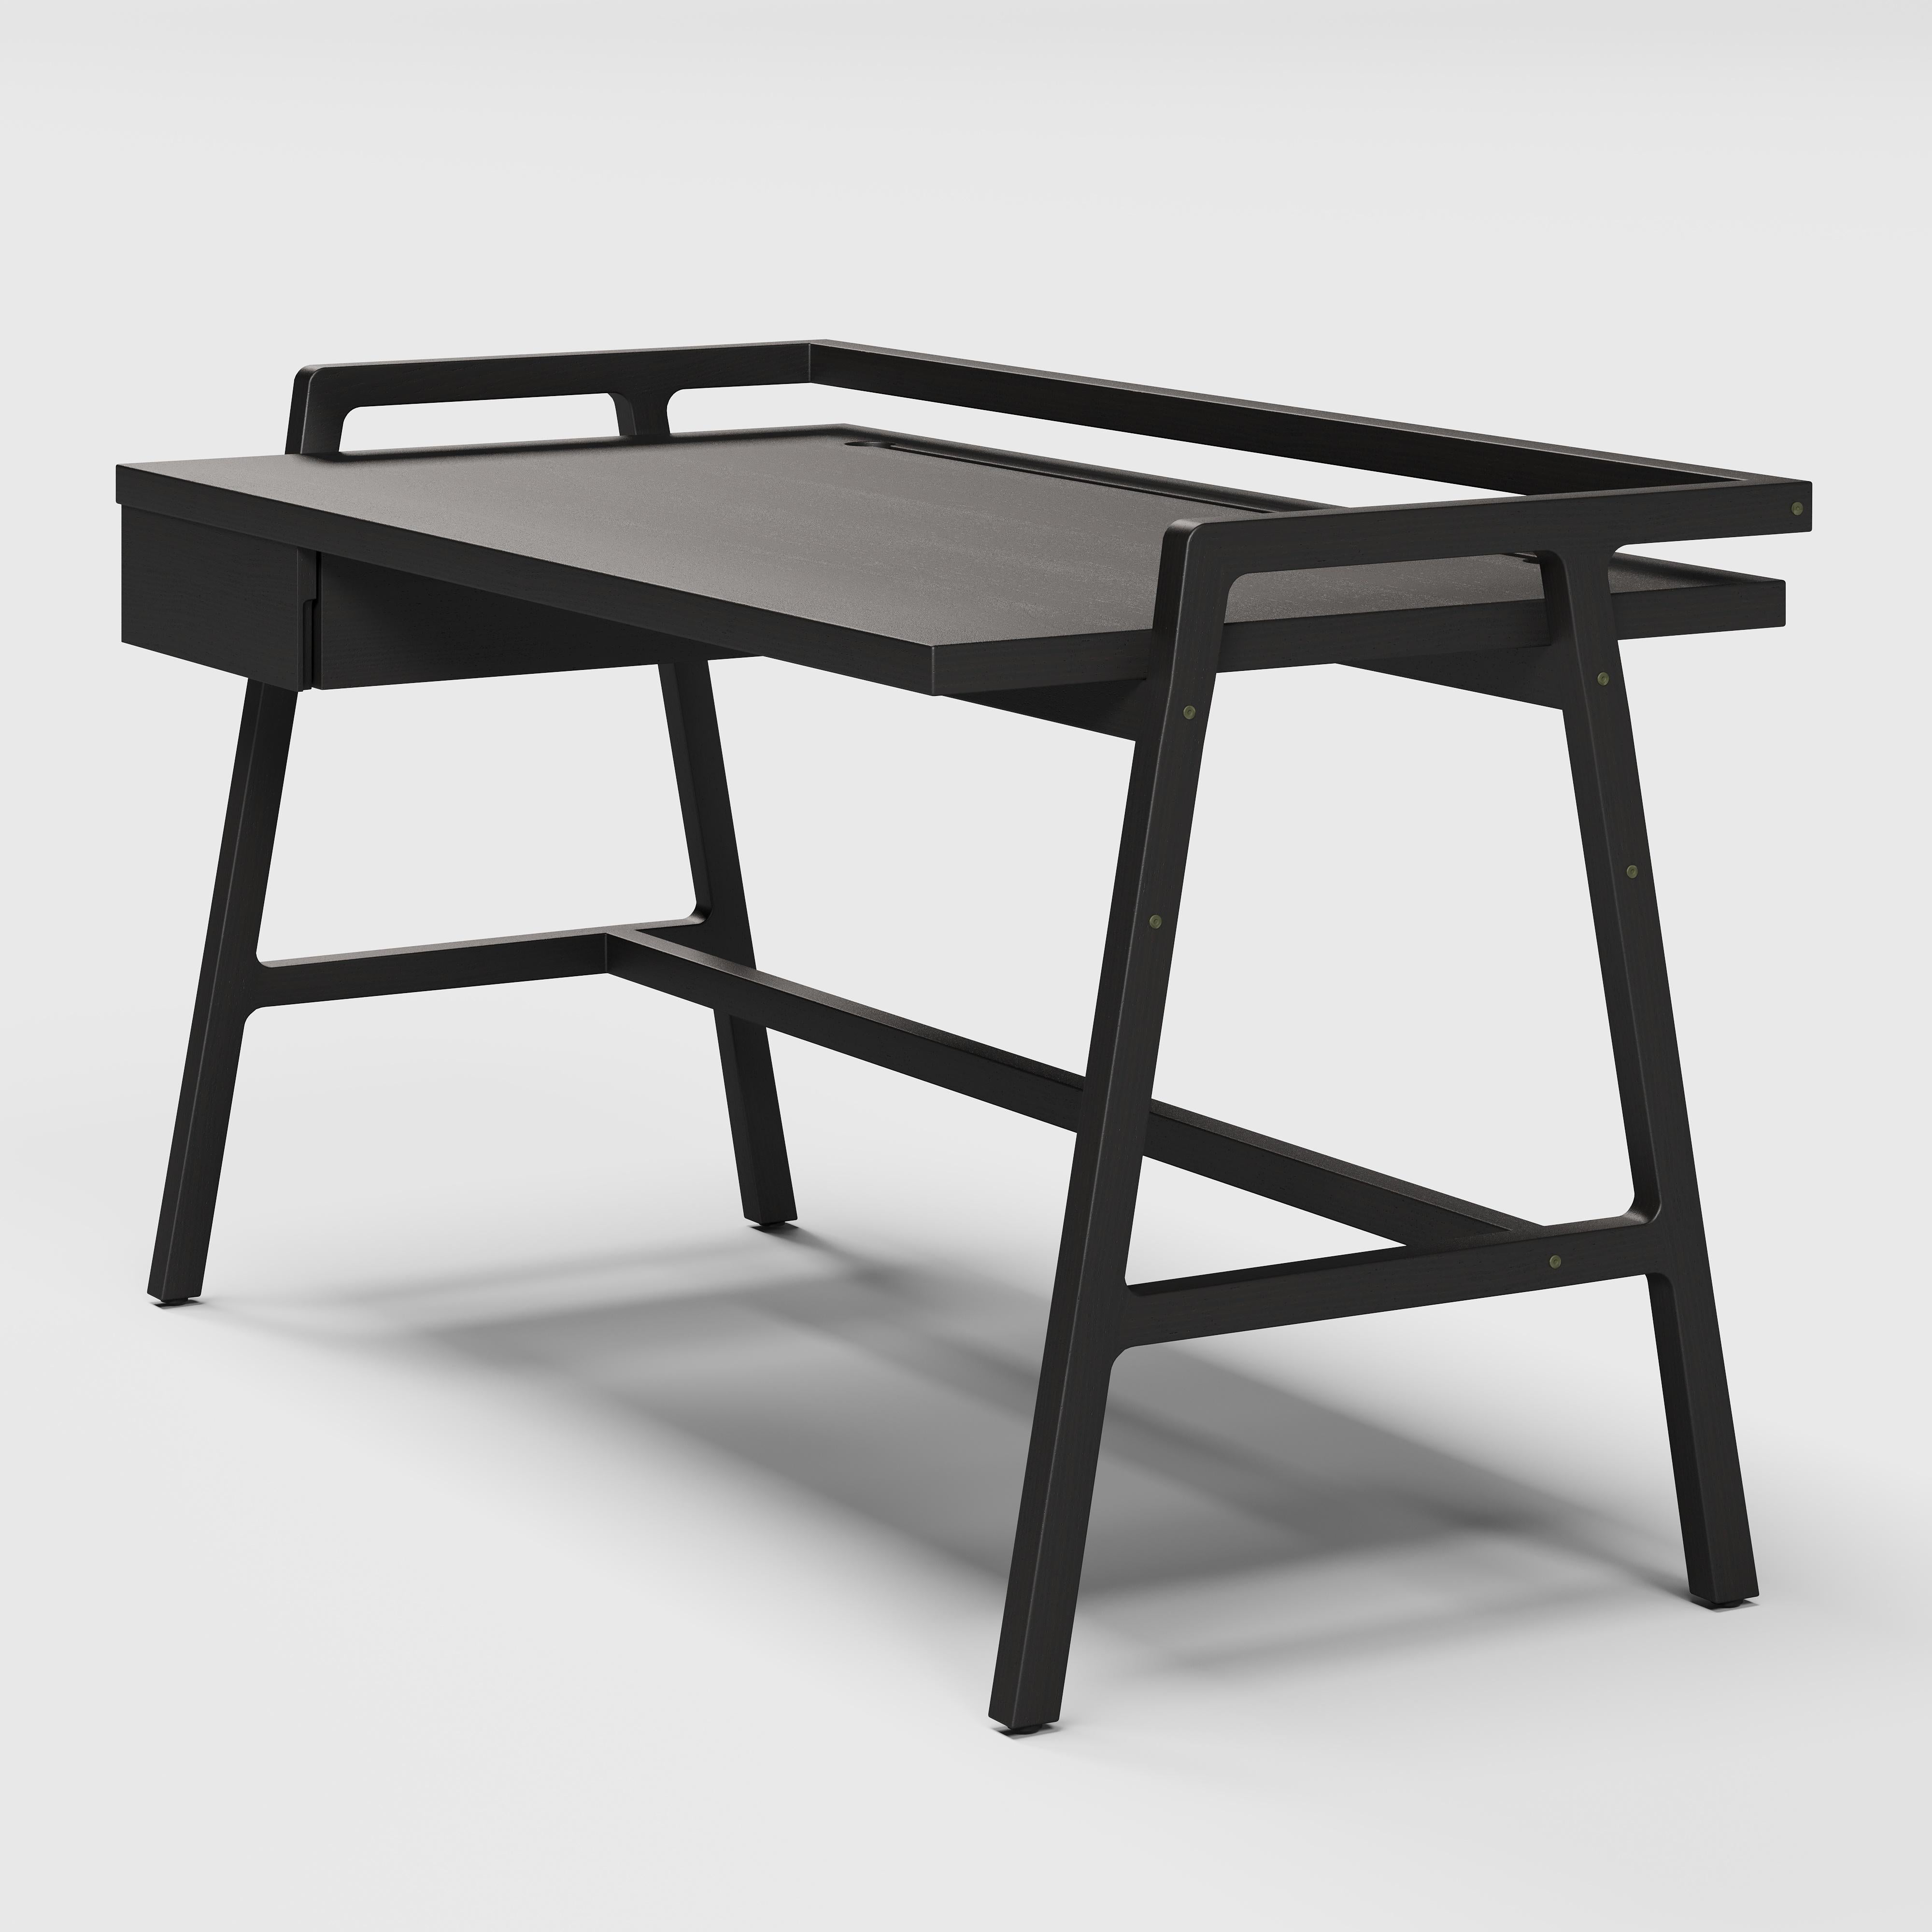 The Hemm desk is an exercise in simplicity, refinement and the necessary details to support daily life. The accessory flute is a seamless way to charge and display your smaller items such as phone and smart pad. While the drawer configurations and